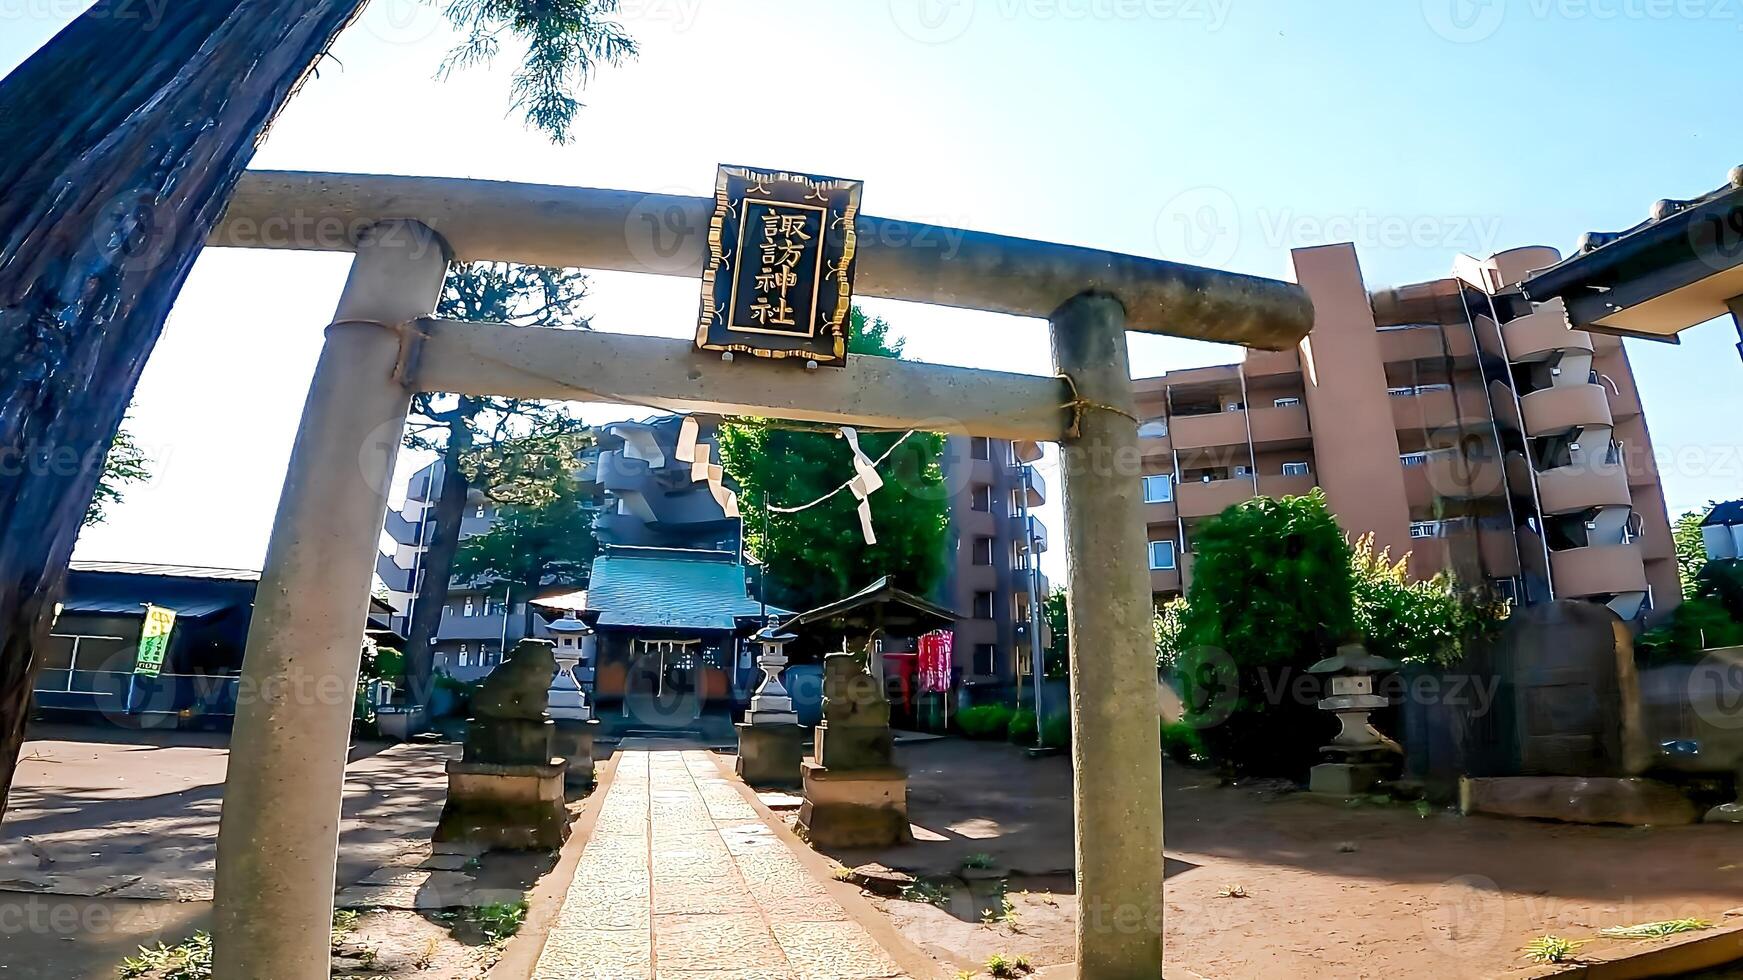 Shrine entrance torii gate and approach to Hikawadai Suwa Shrine, a shrine located in Hikawadai, Nerima Ward, Tokyo, Japan It was founded in the Edo period and has been revered as a shrine photo